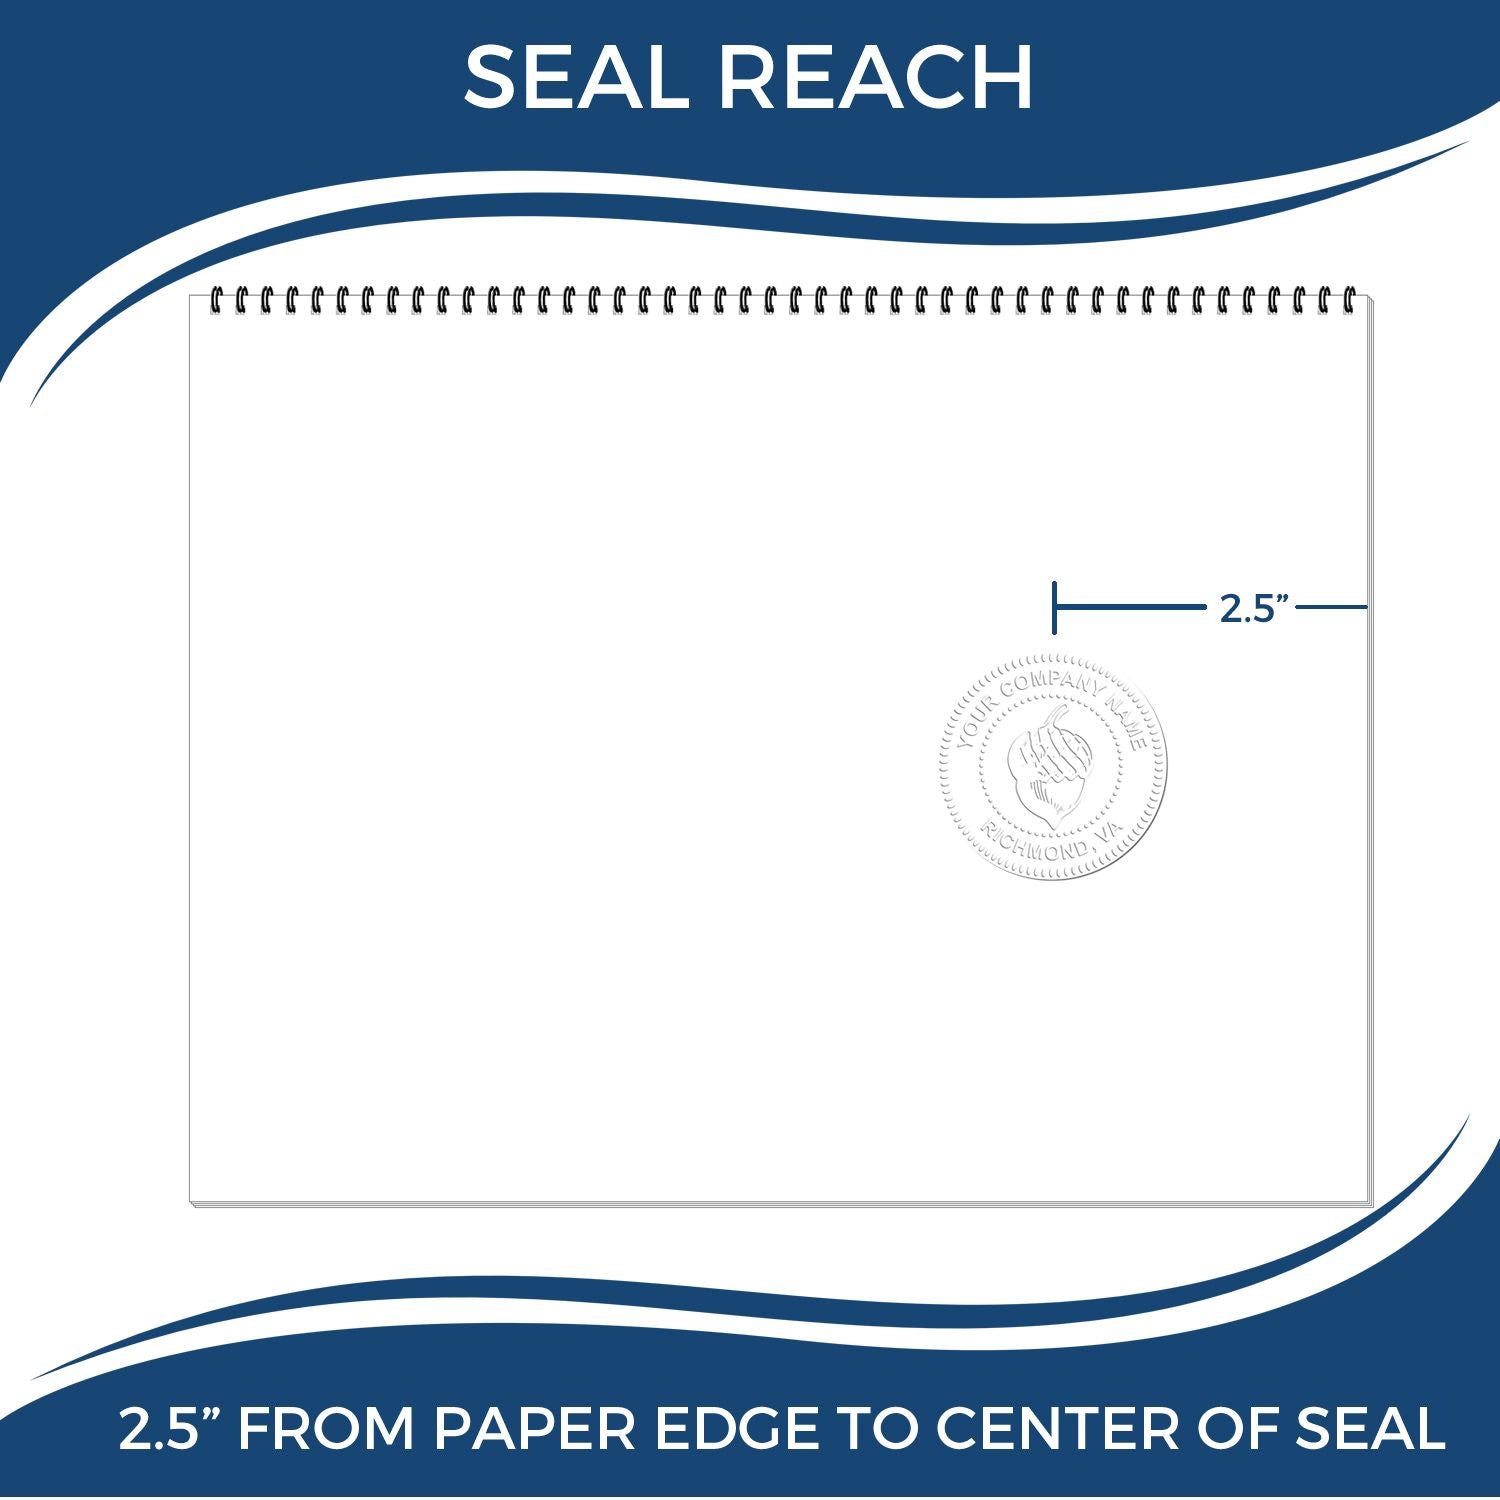 An infographic showing the seal reach which is represented by a ruler and a miniature seal image of the Long Reach South Dakota Geology Seal